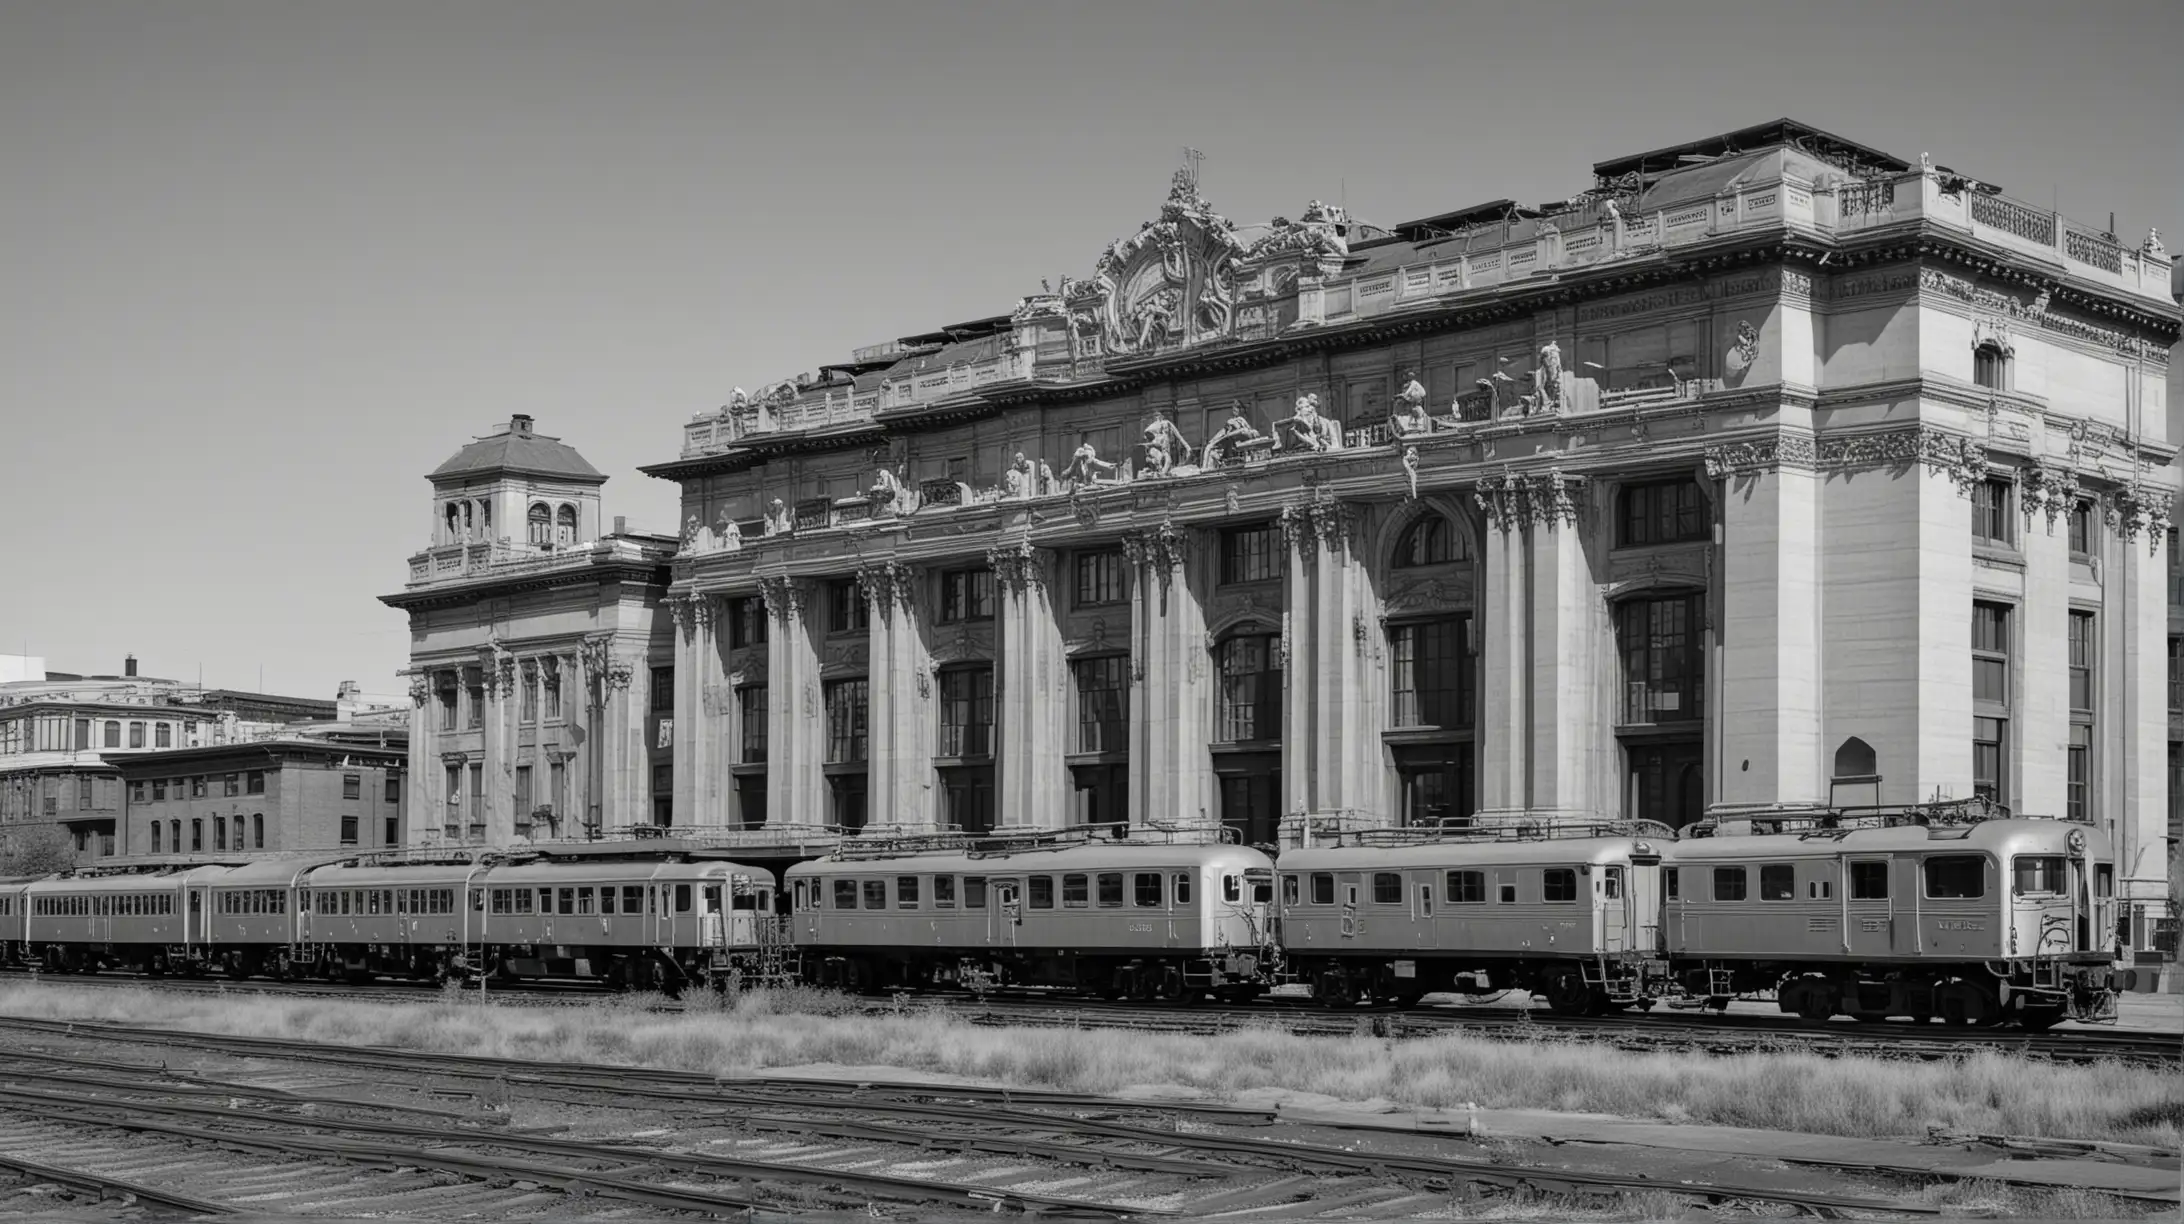 1930s Beaux Arts Railroad Terminal with Art Deco Locomotives and Passenger Cars in Monochrome